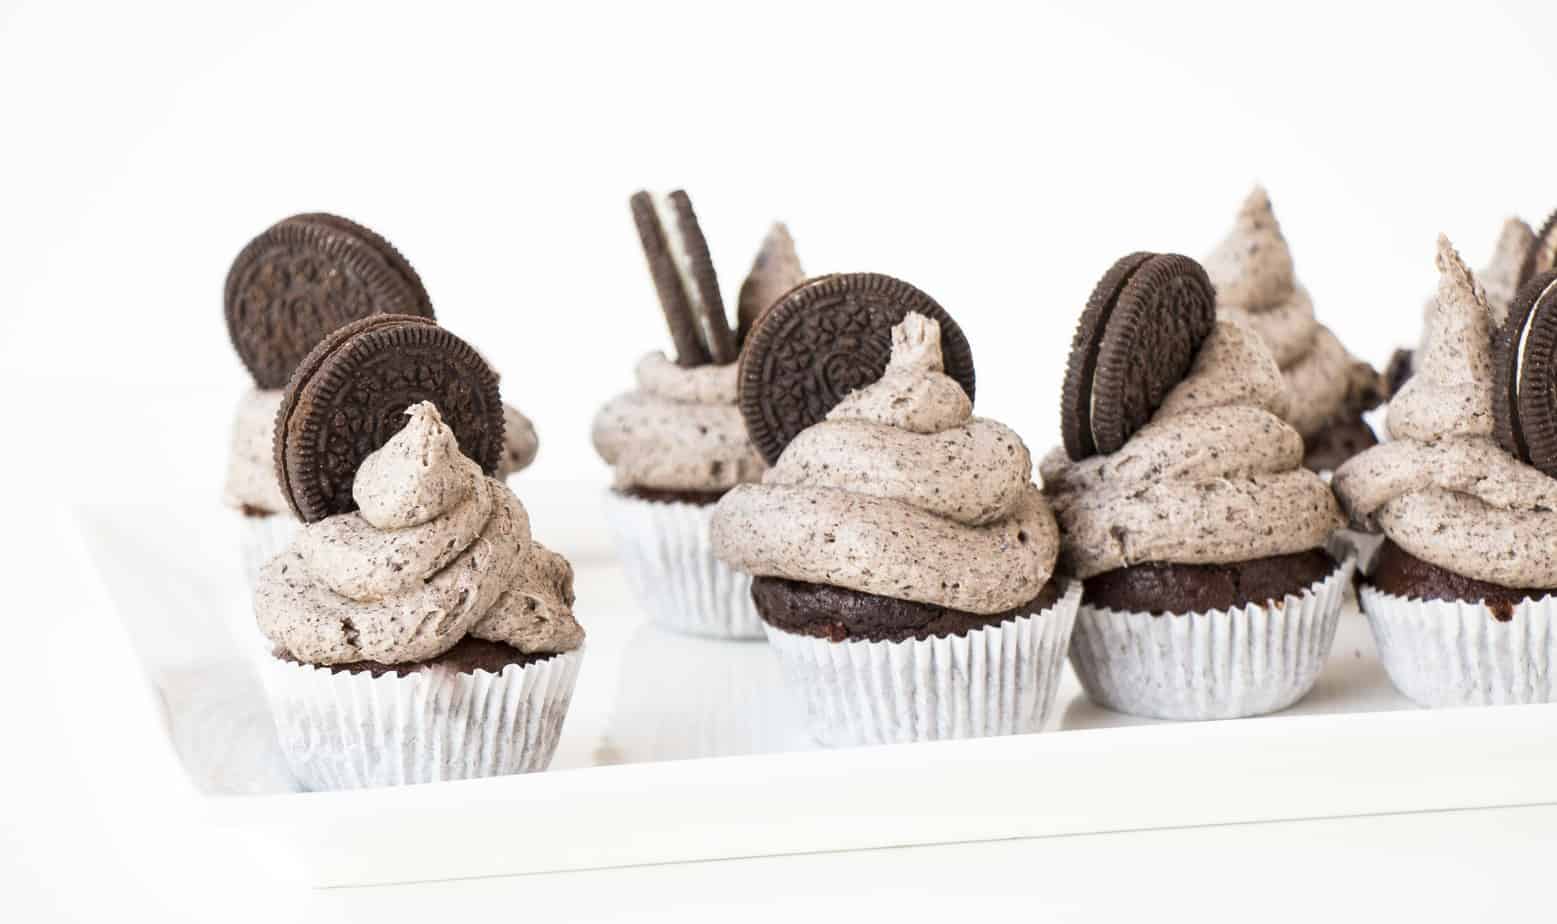 A tray of Oreo cupcakes with Oreo frosting.